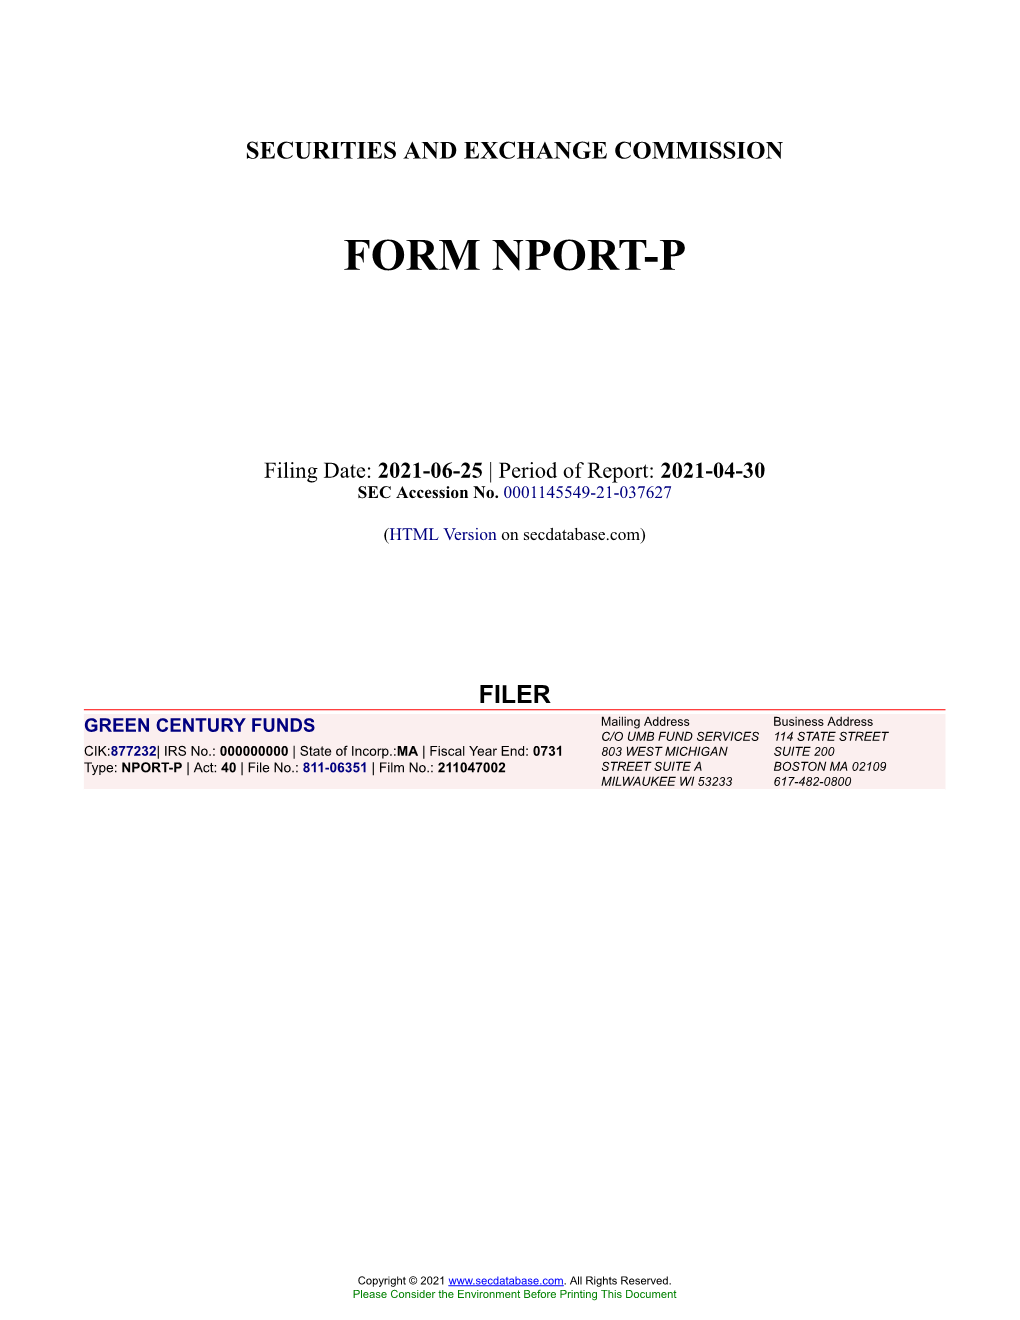 GREEN CENTURY FUNDS Form NPORT-P Filed 2021-06-25